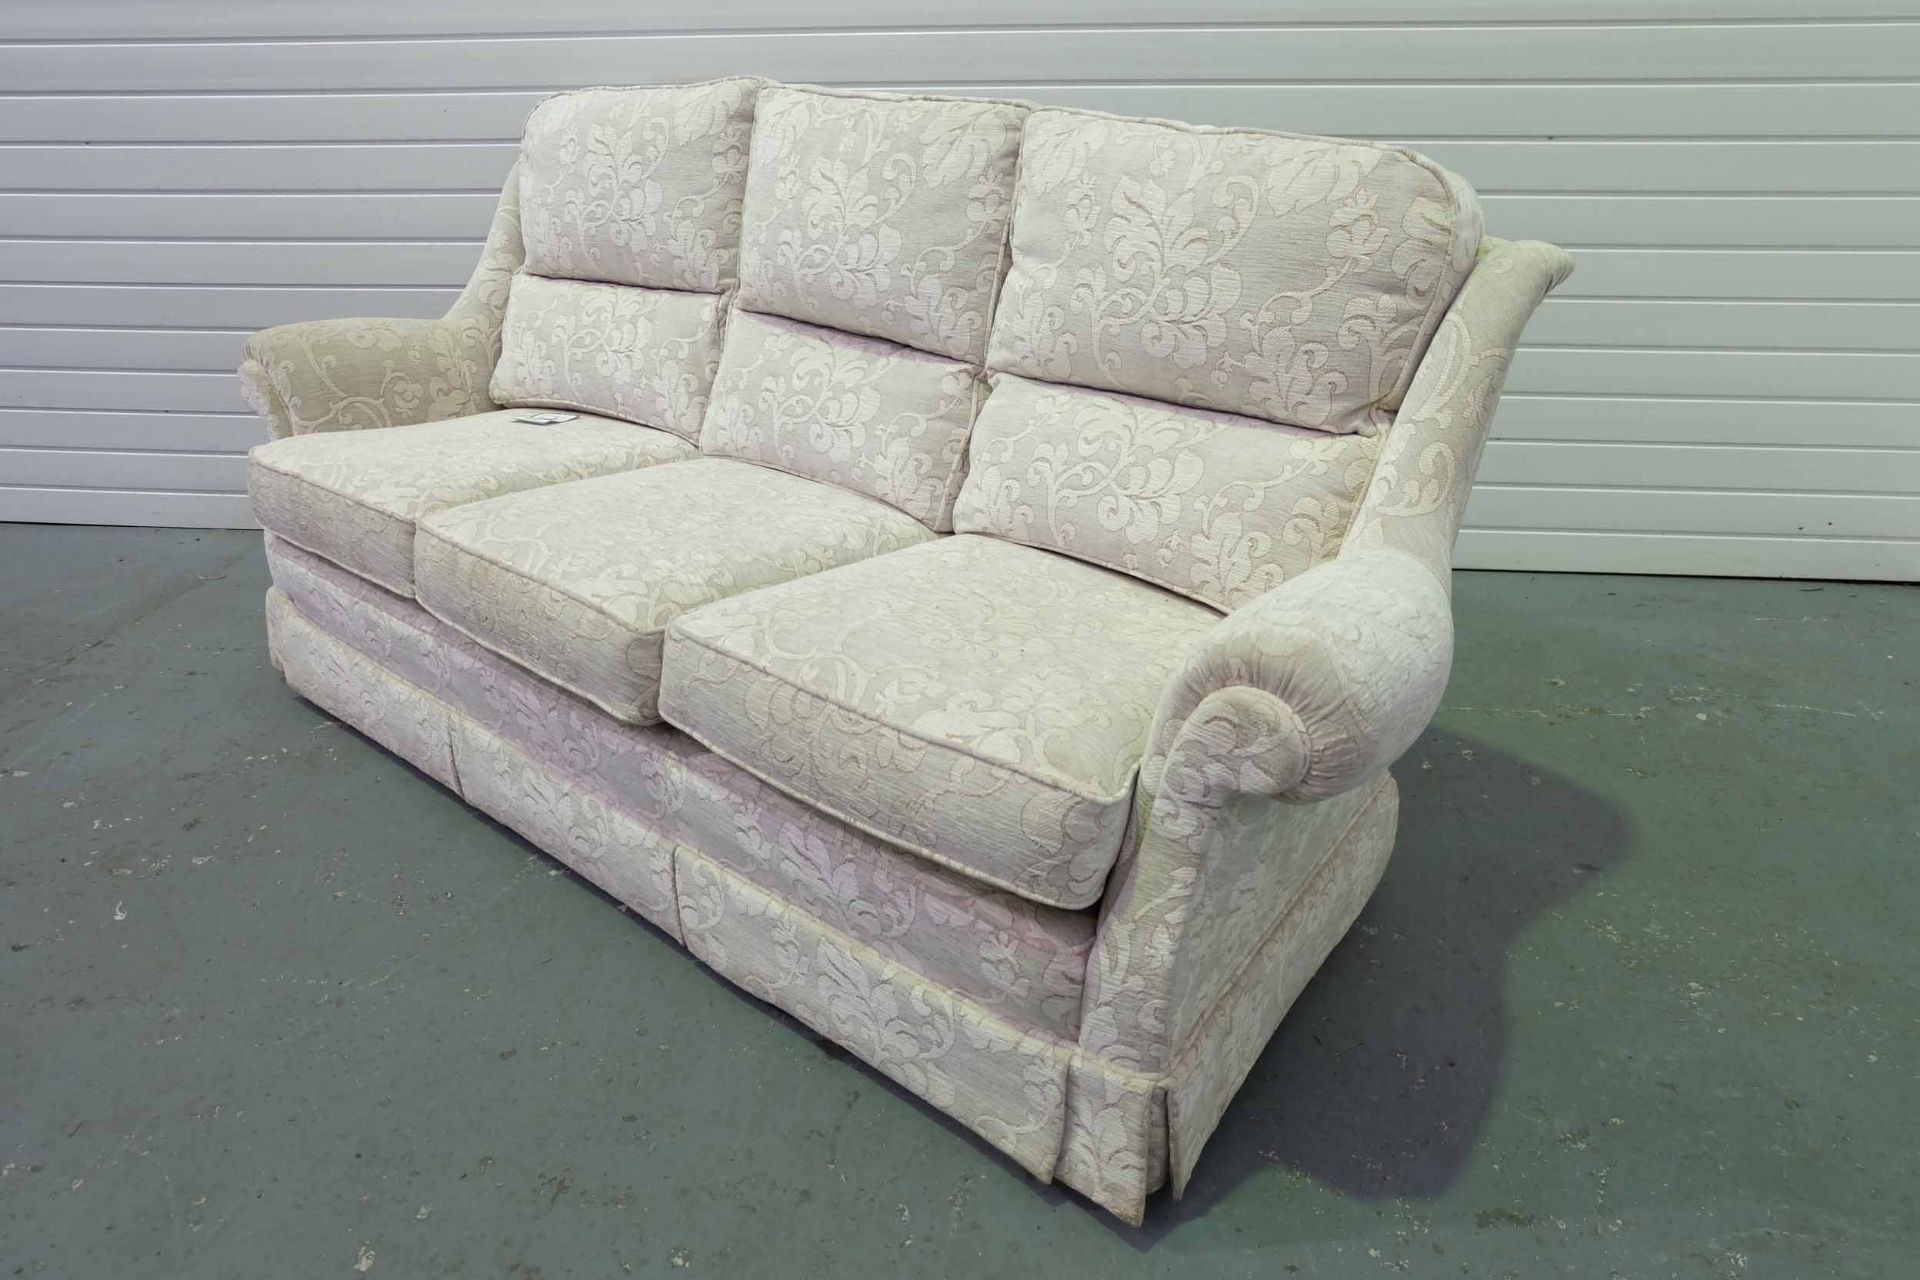 Vale Bridgecraft 'Langfield' Collection Handmade 3 Seater Sofa. With Valance. - Image 2 of 3